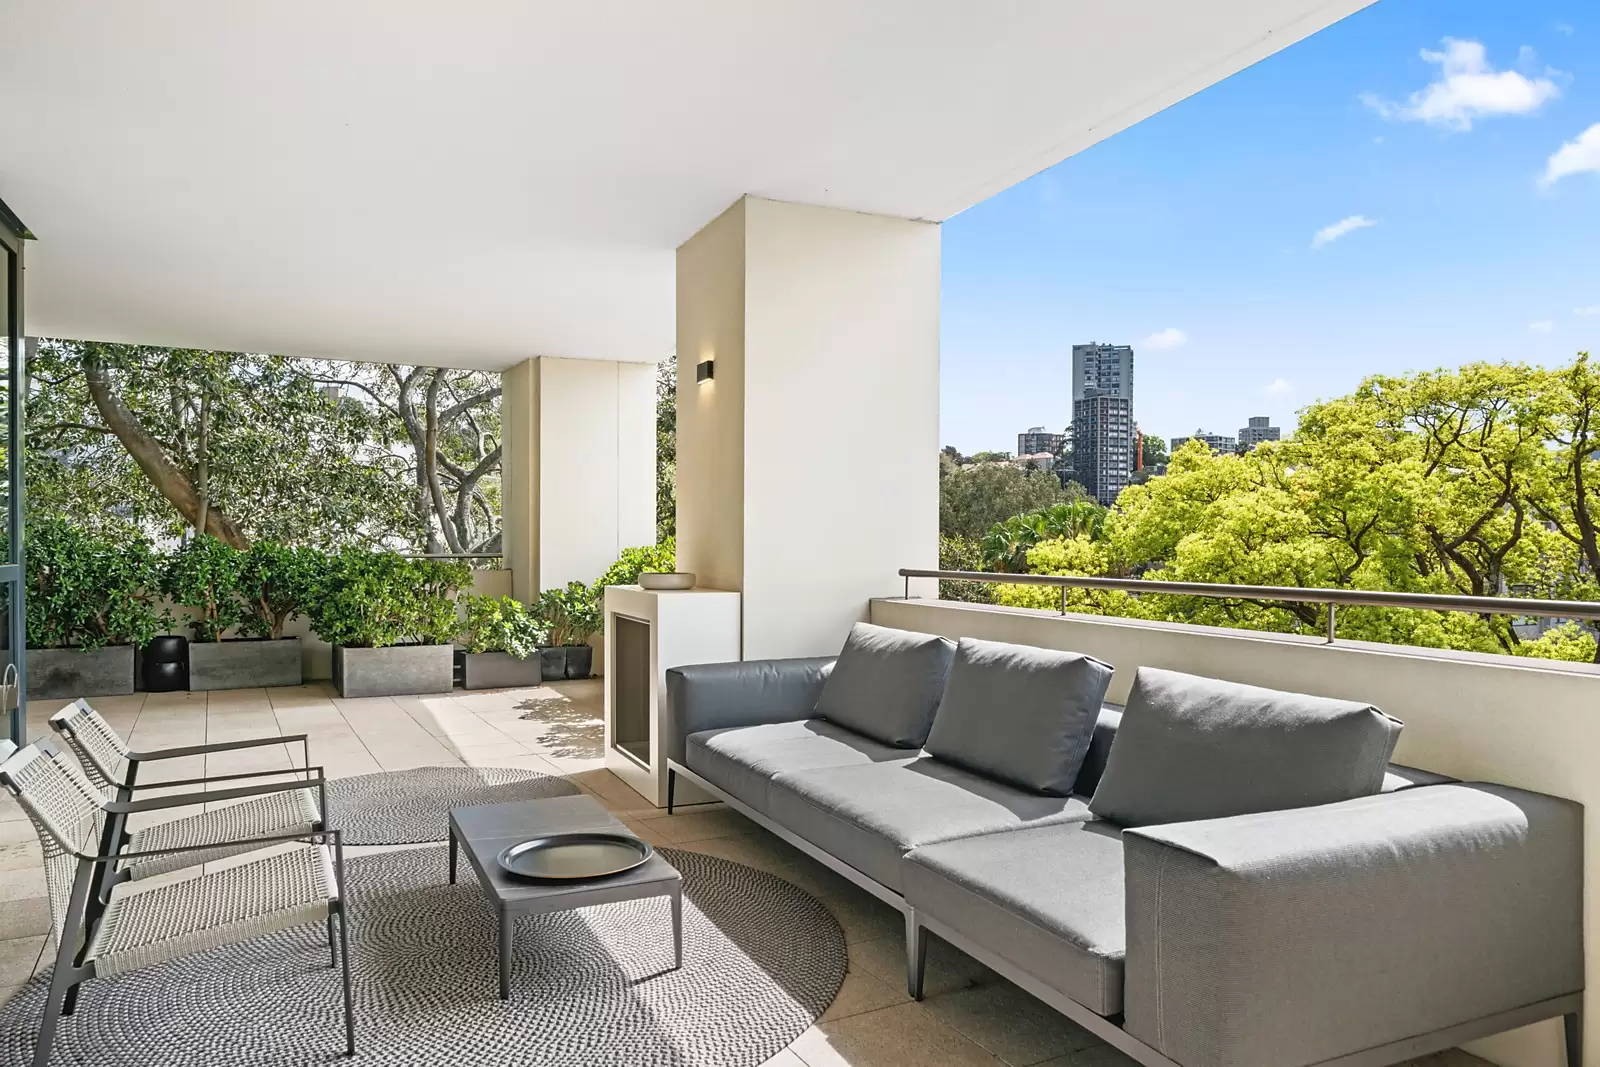 Photo #3: 5B/22 Knox Street, Double Bay - Sold by Sydney Sotheby's International Realty